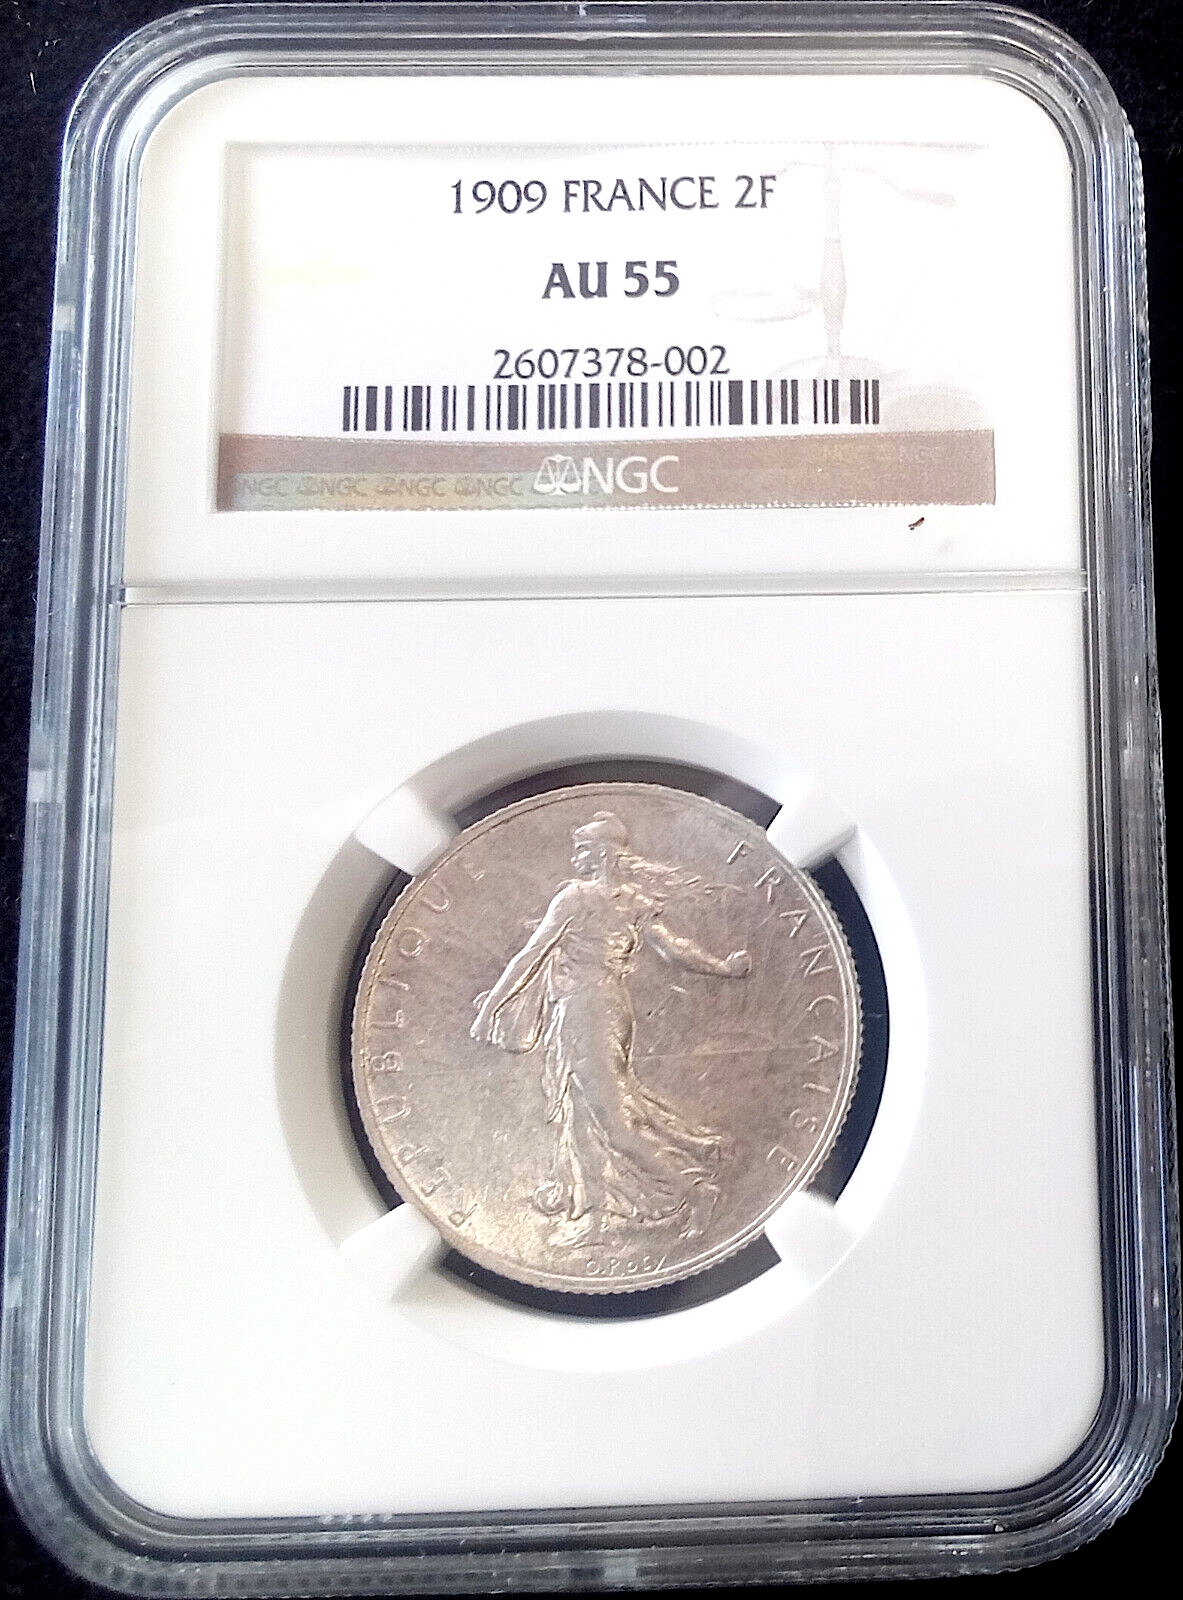 LOW MINT **NGC AU55 ONLY 2 HIGHER** 1909 France 2 Francs km#845.1 Silver Coin